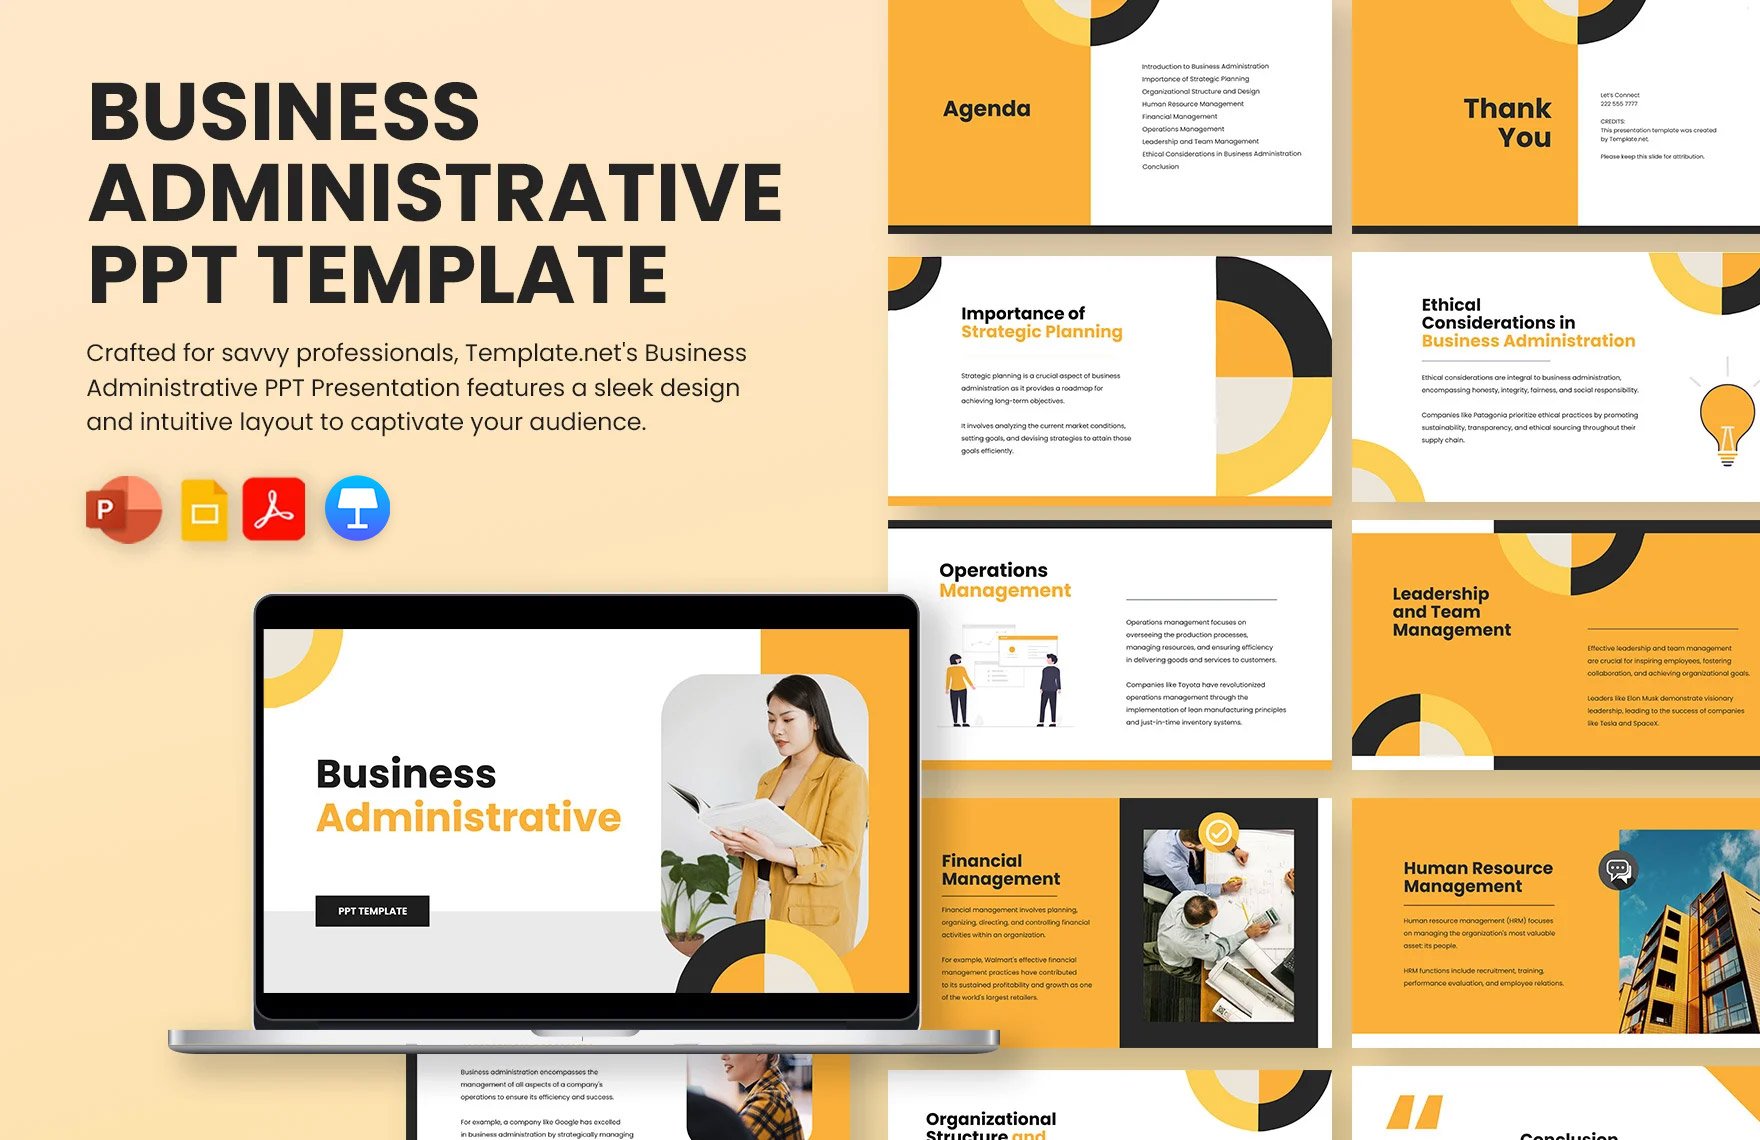 Business Administrative PPT Template